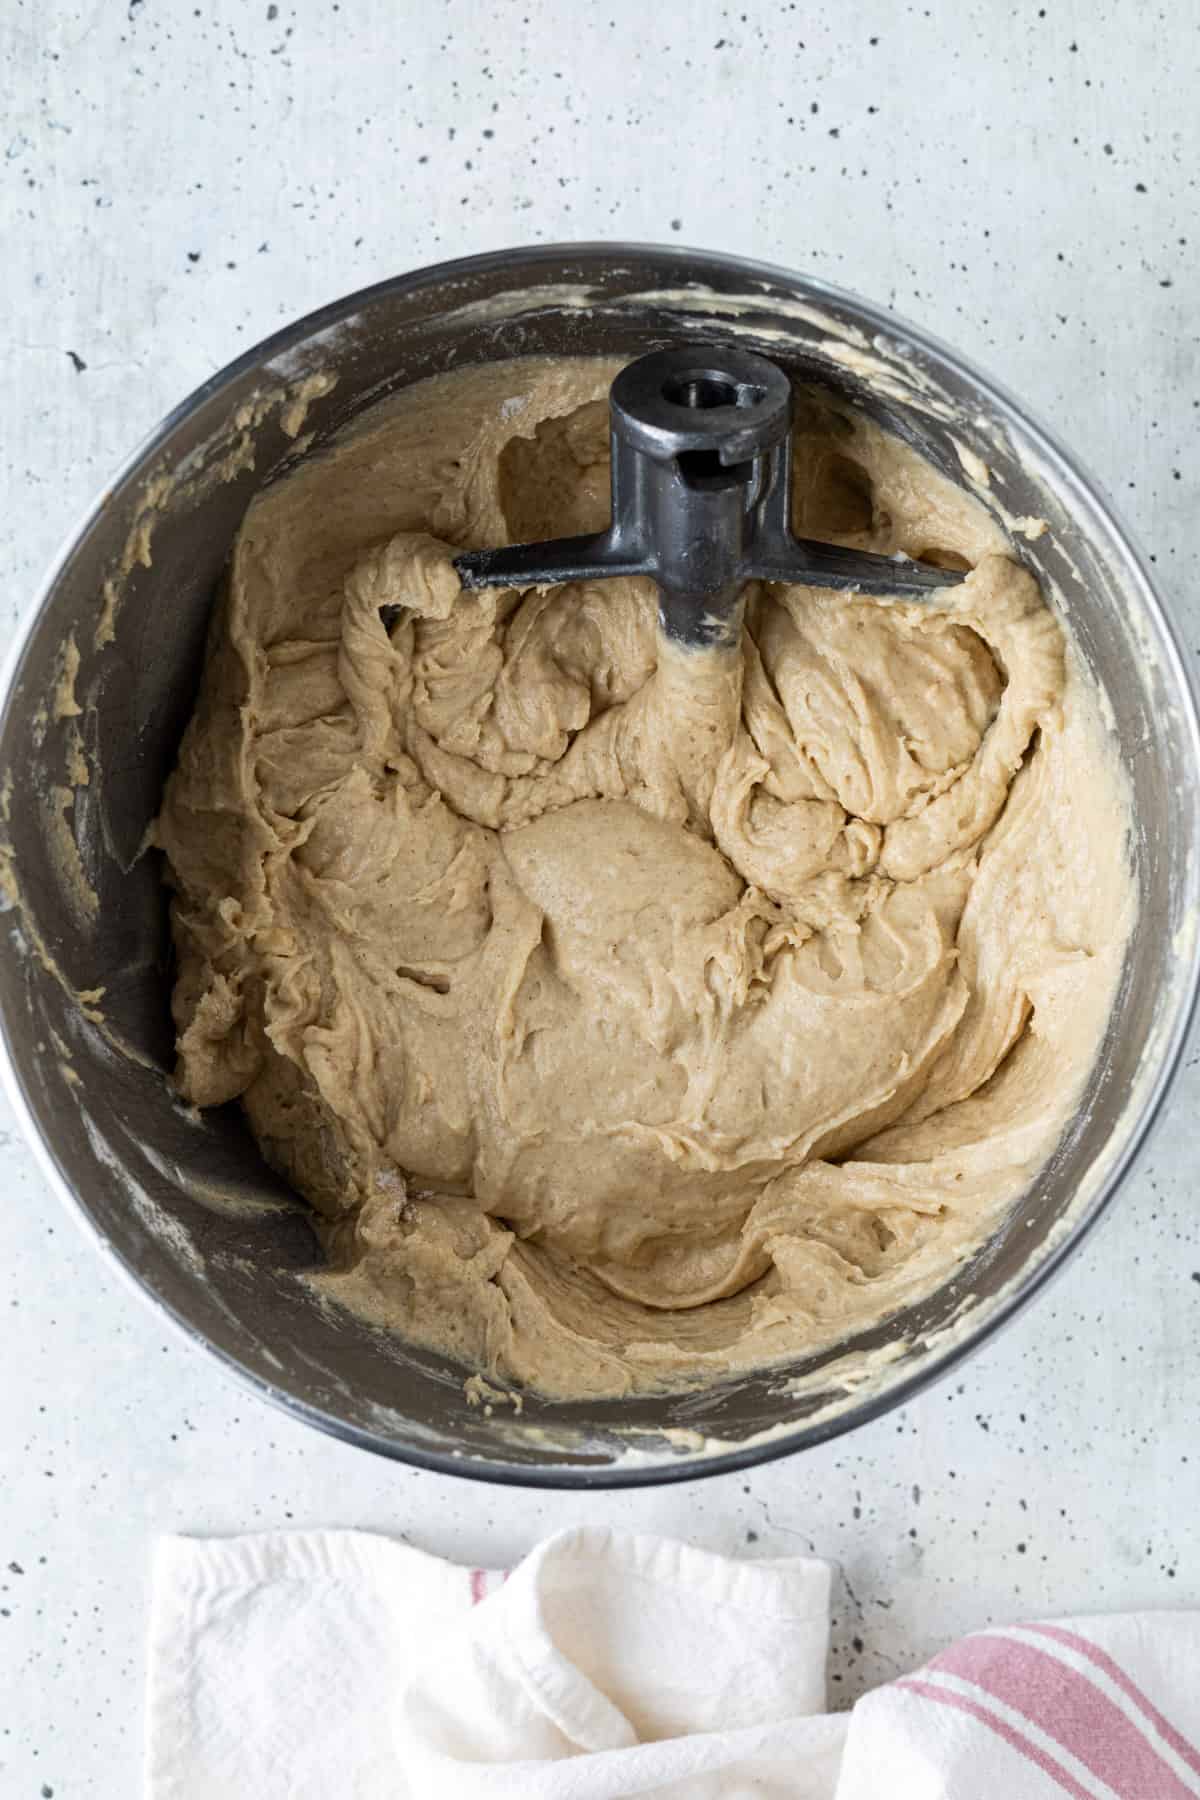 Cake batter in a mixer bowl with the paddle attachment.